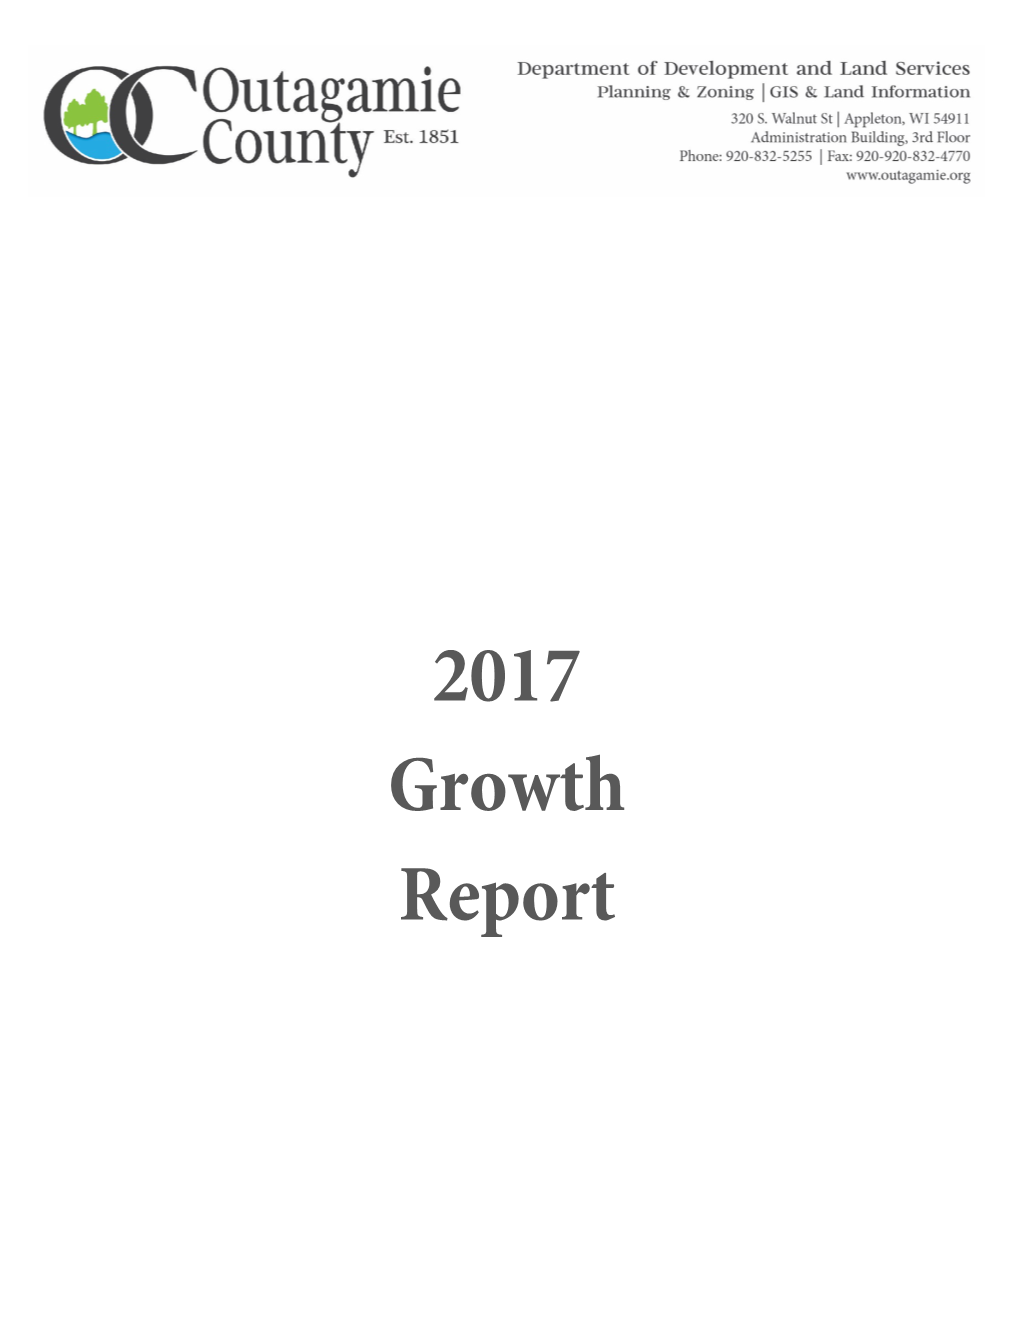 2017 Growth Report OUTAGAMIE COUNTY 2017 GROWTH REPORT